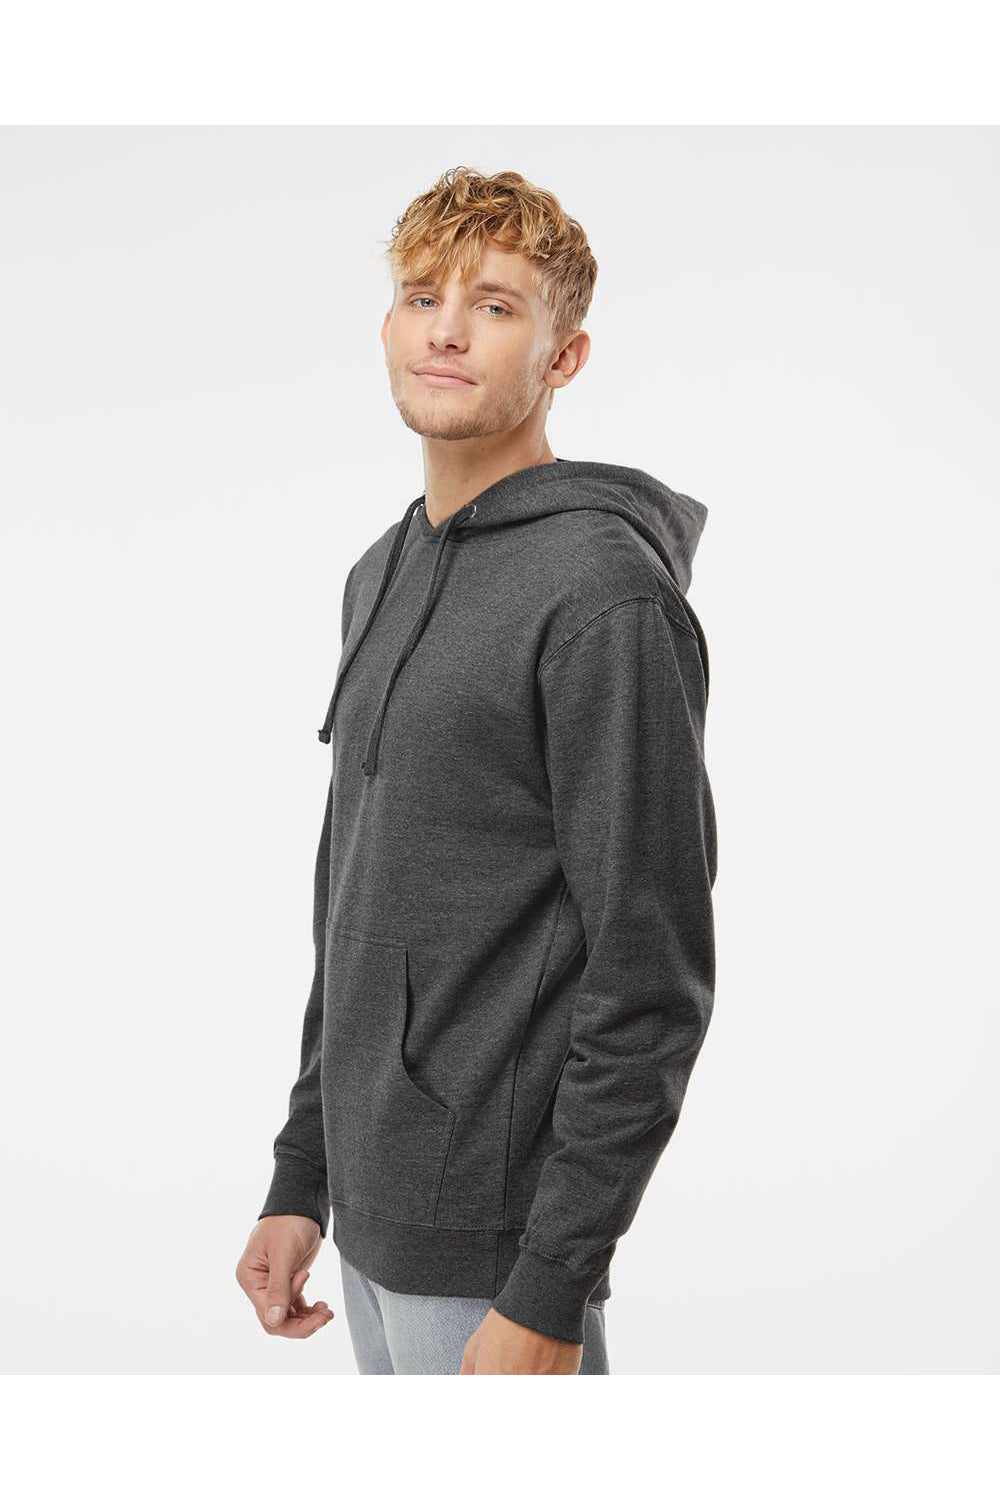 Independent Trading Co. SS4500 Mens Hooded Sweatshirt Hoodie Heather Charcoal Grey Model Side